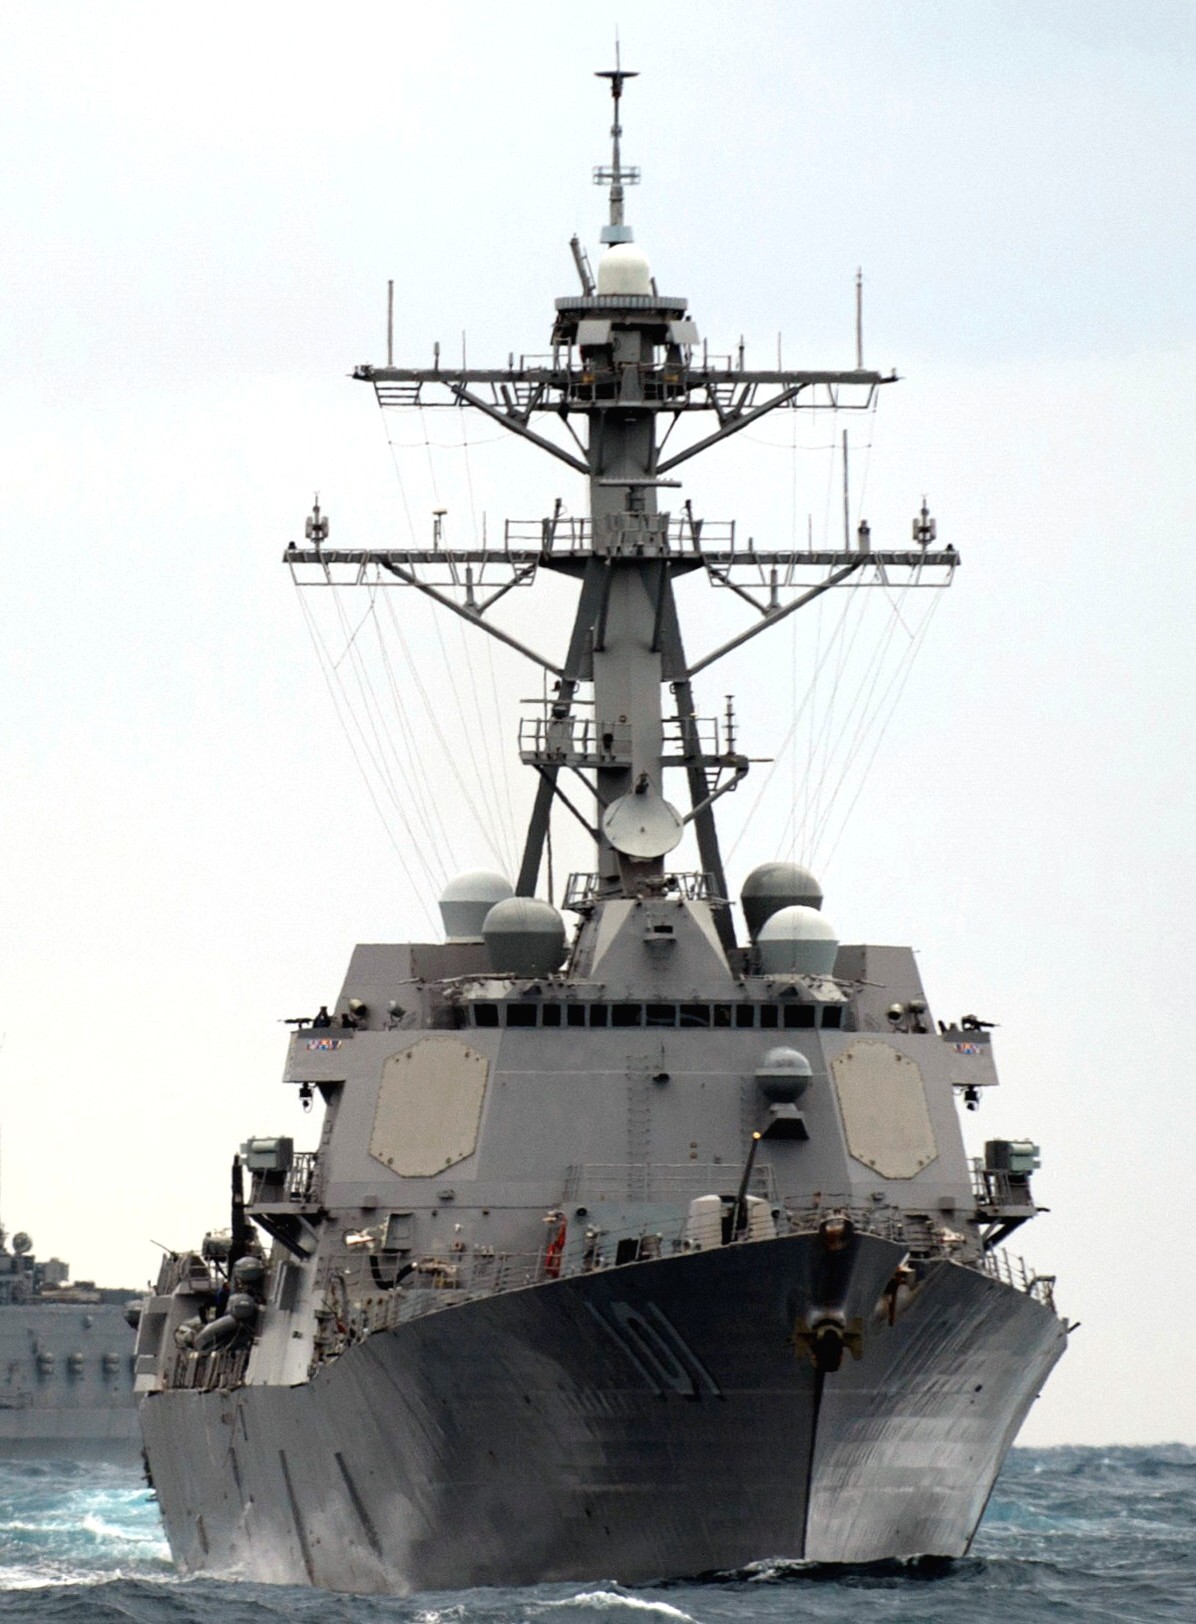 ddg-101 uss gridley arleigh burke class guided missile destroyer aegis us navy 30